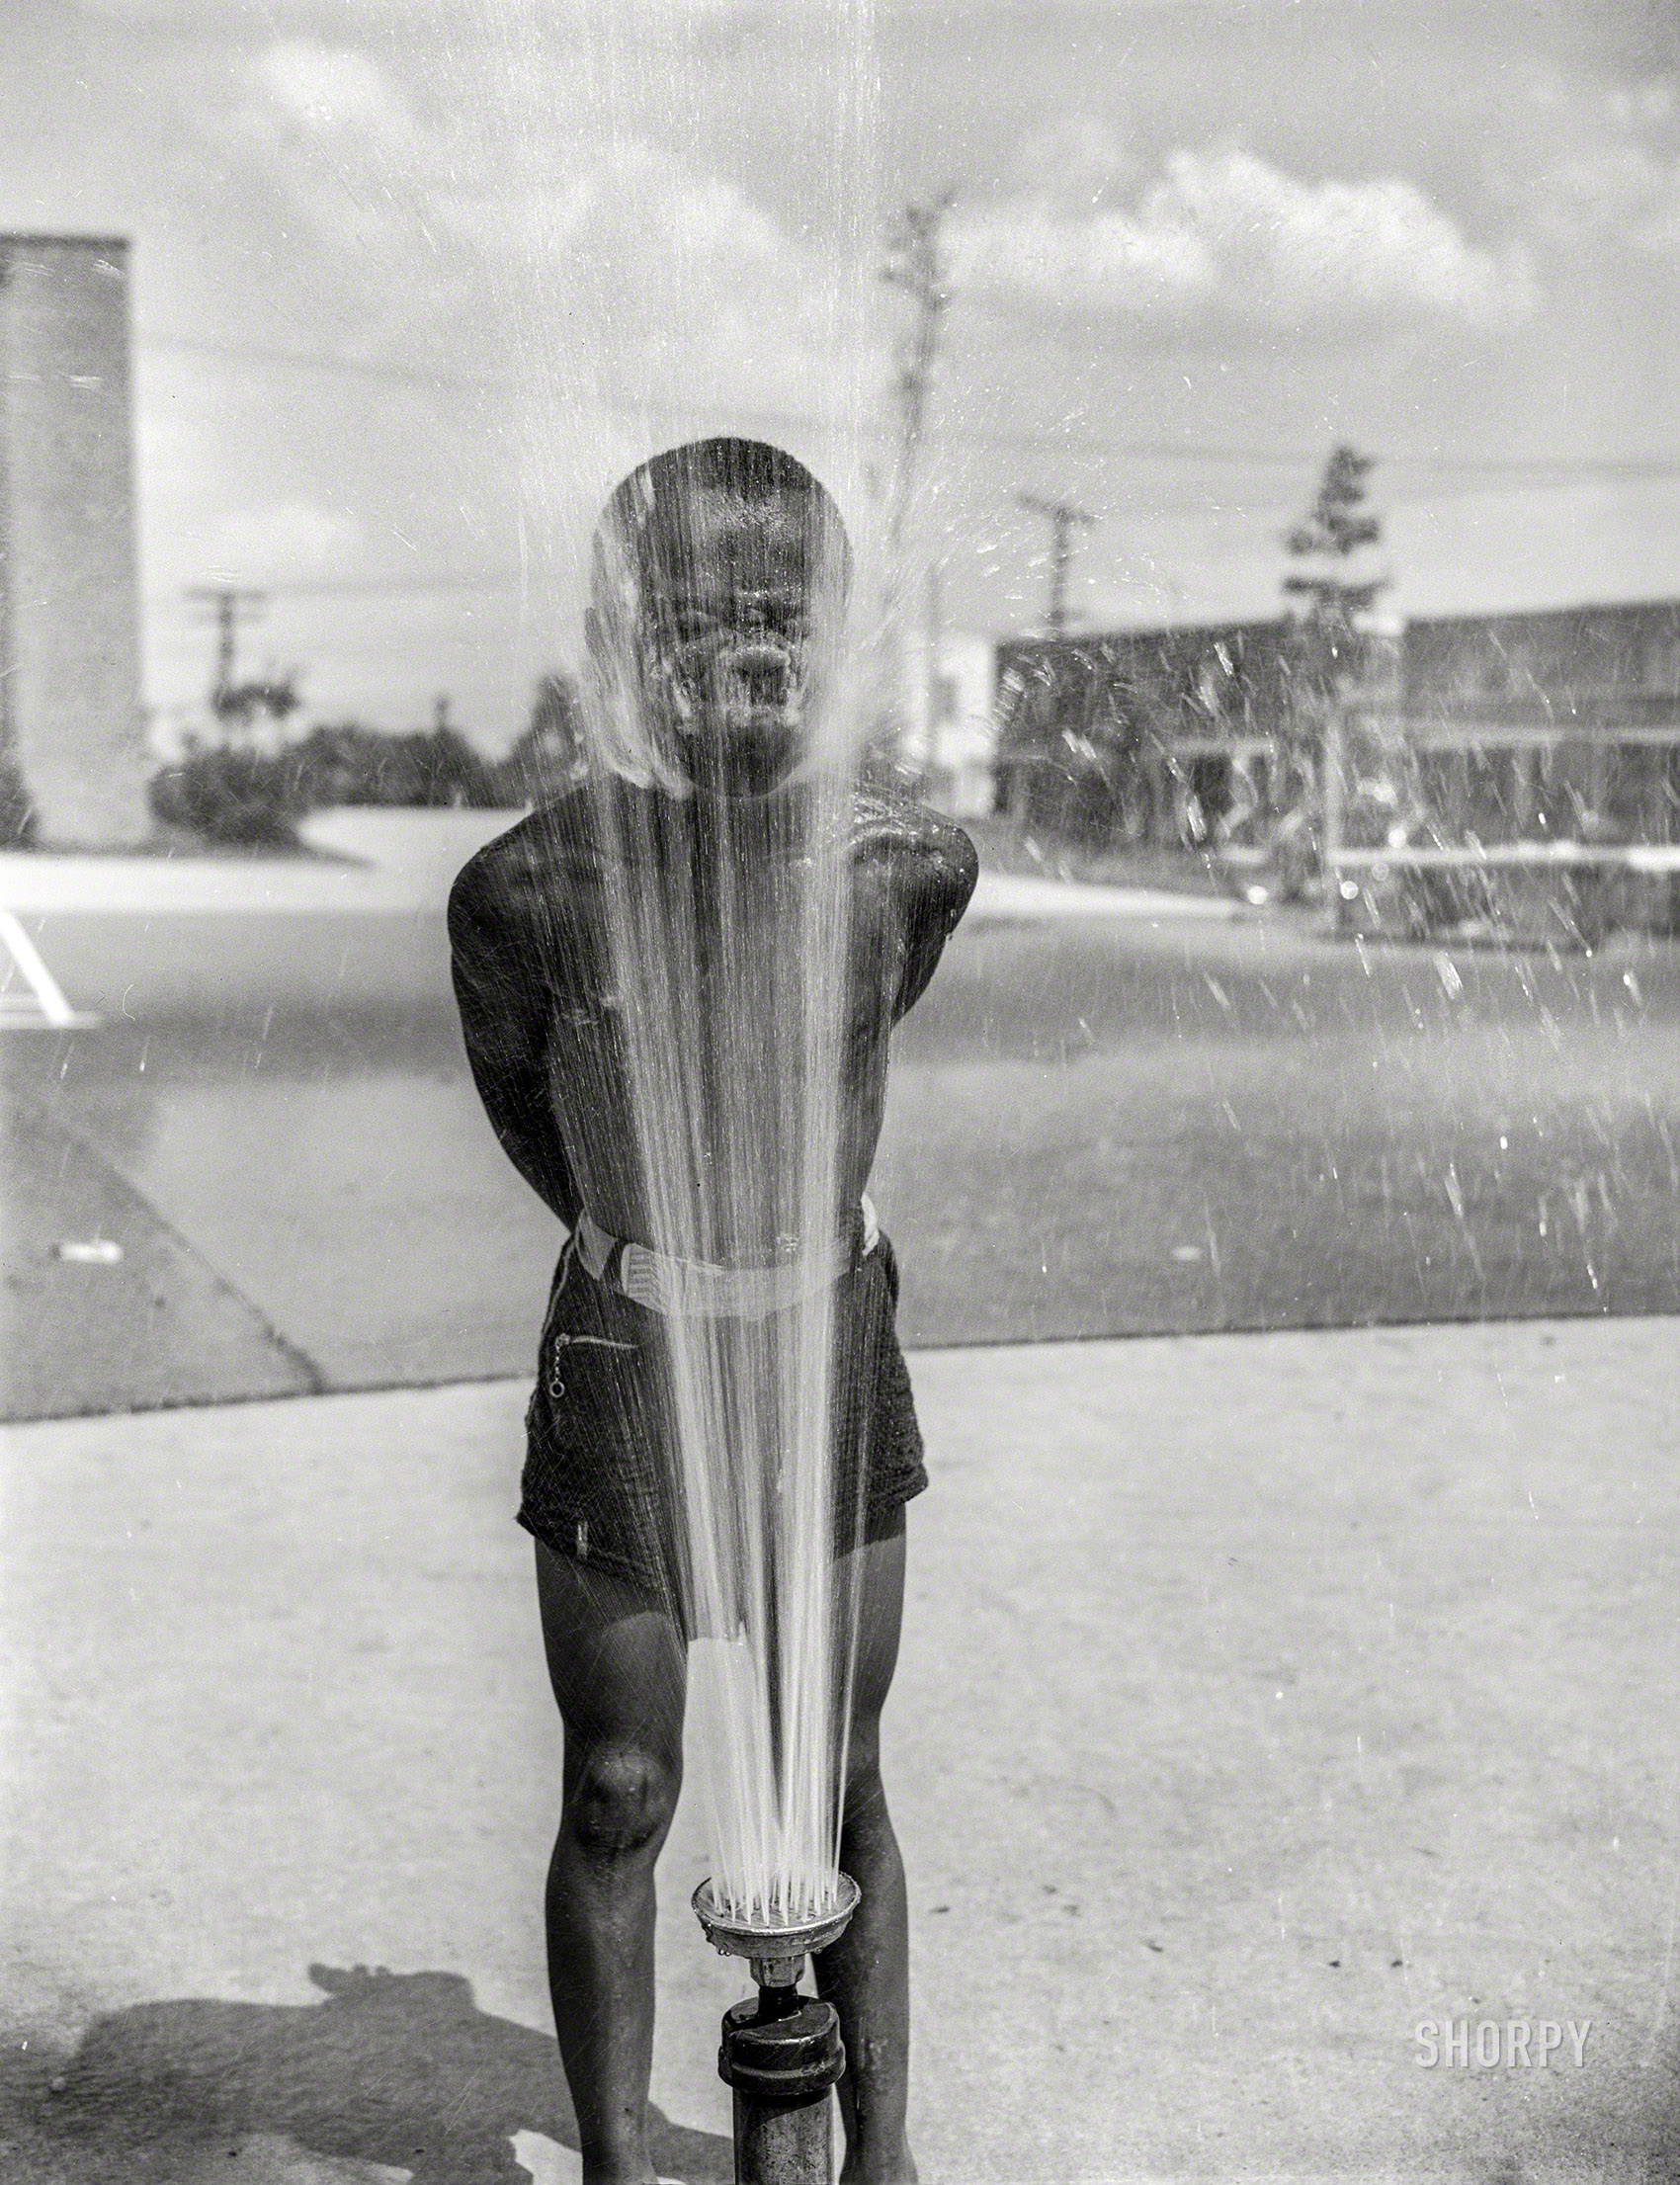 June 1942. Washington, D.C. "Frederick Douglass housing project in Anacostia. Playing in the community sprayer." Photo by Gordon Parks for the Office of War Information. View full size.